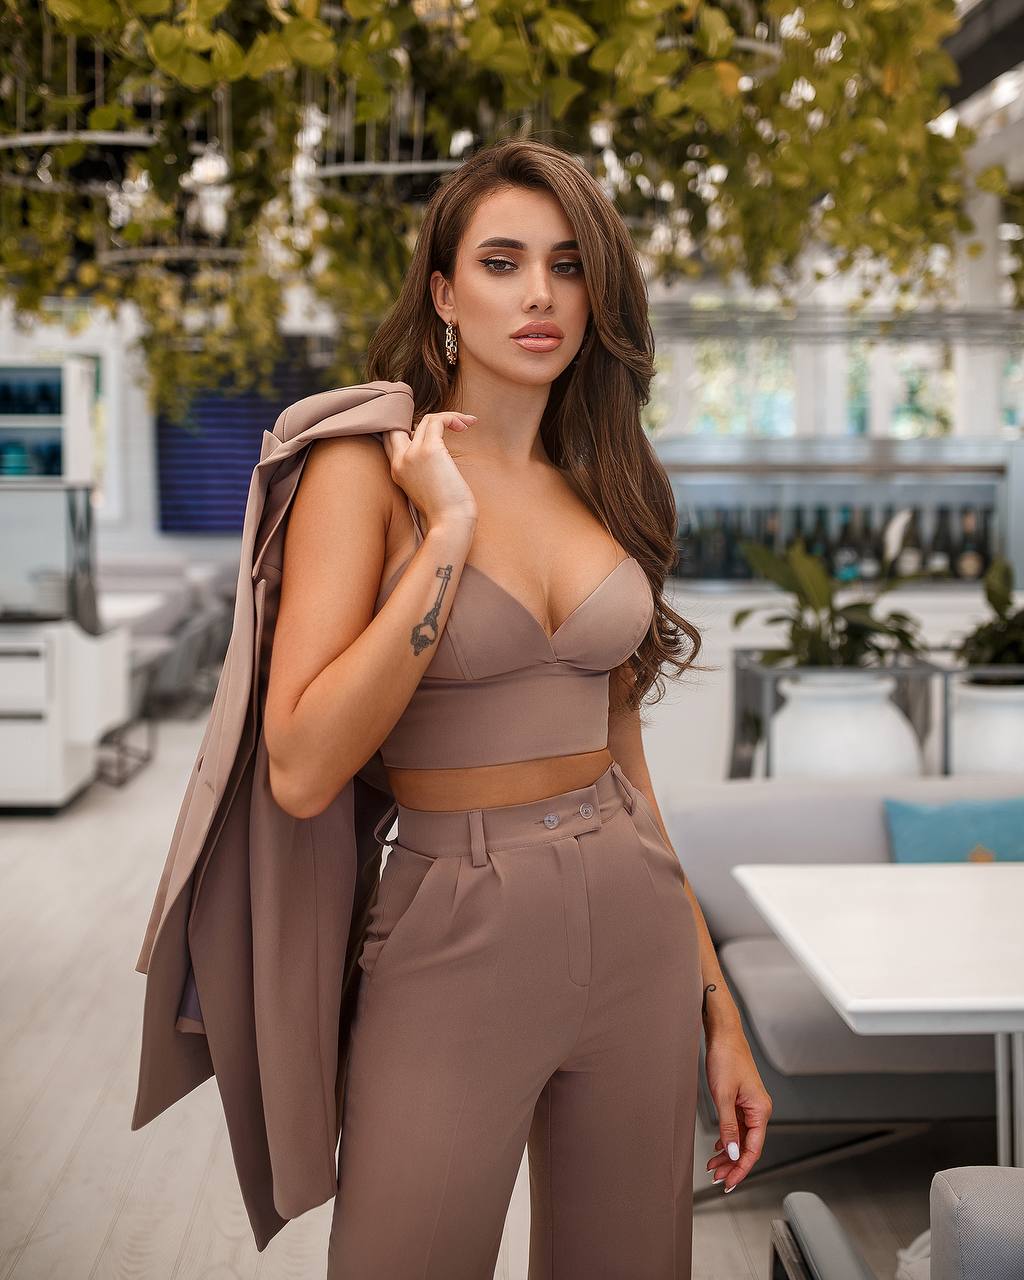 Beige DOUBLE BREASTED SUIT 3-PIECE (ARTICLE 300)